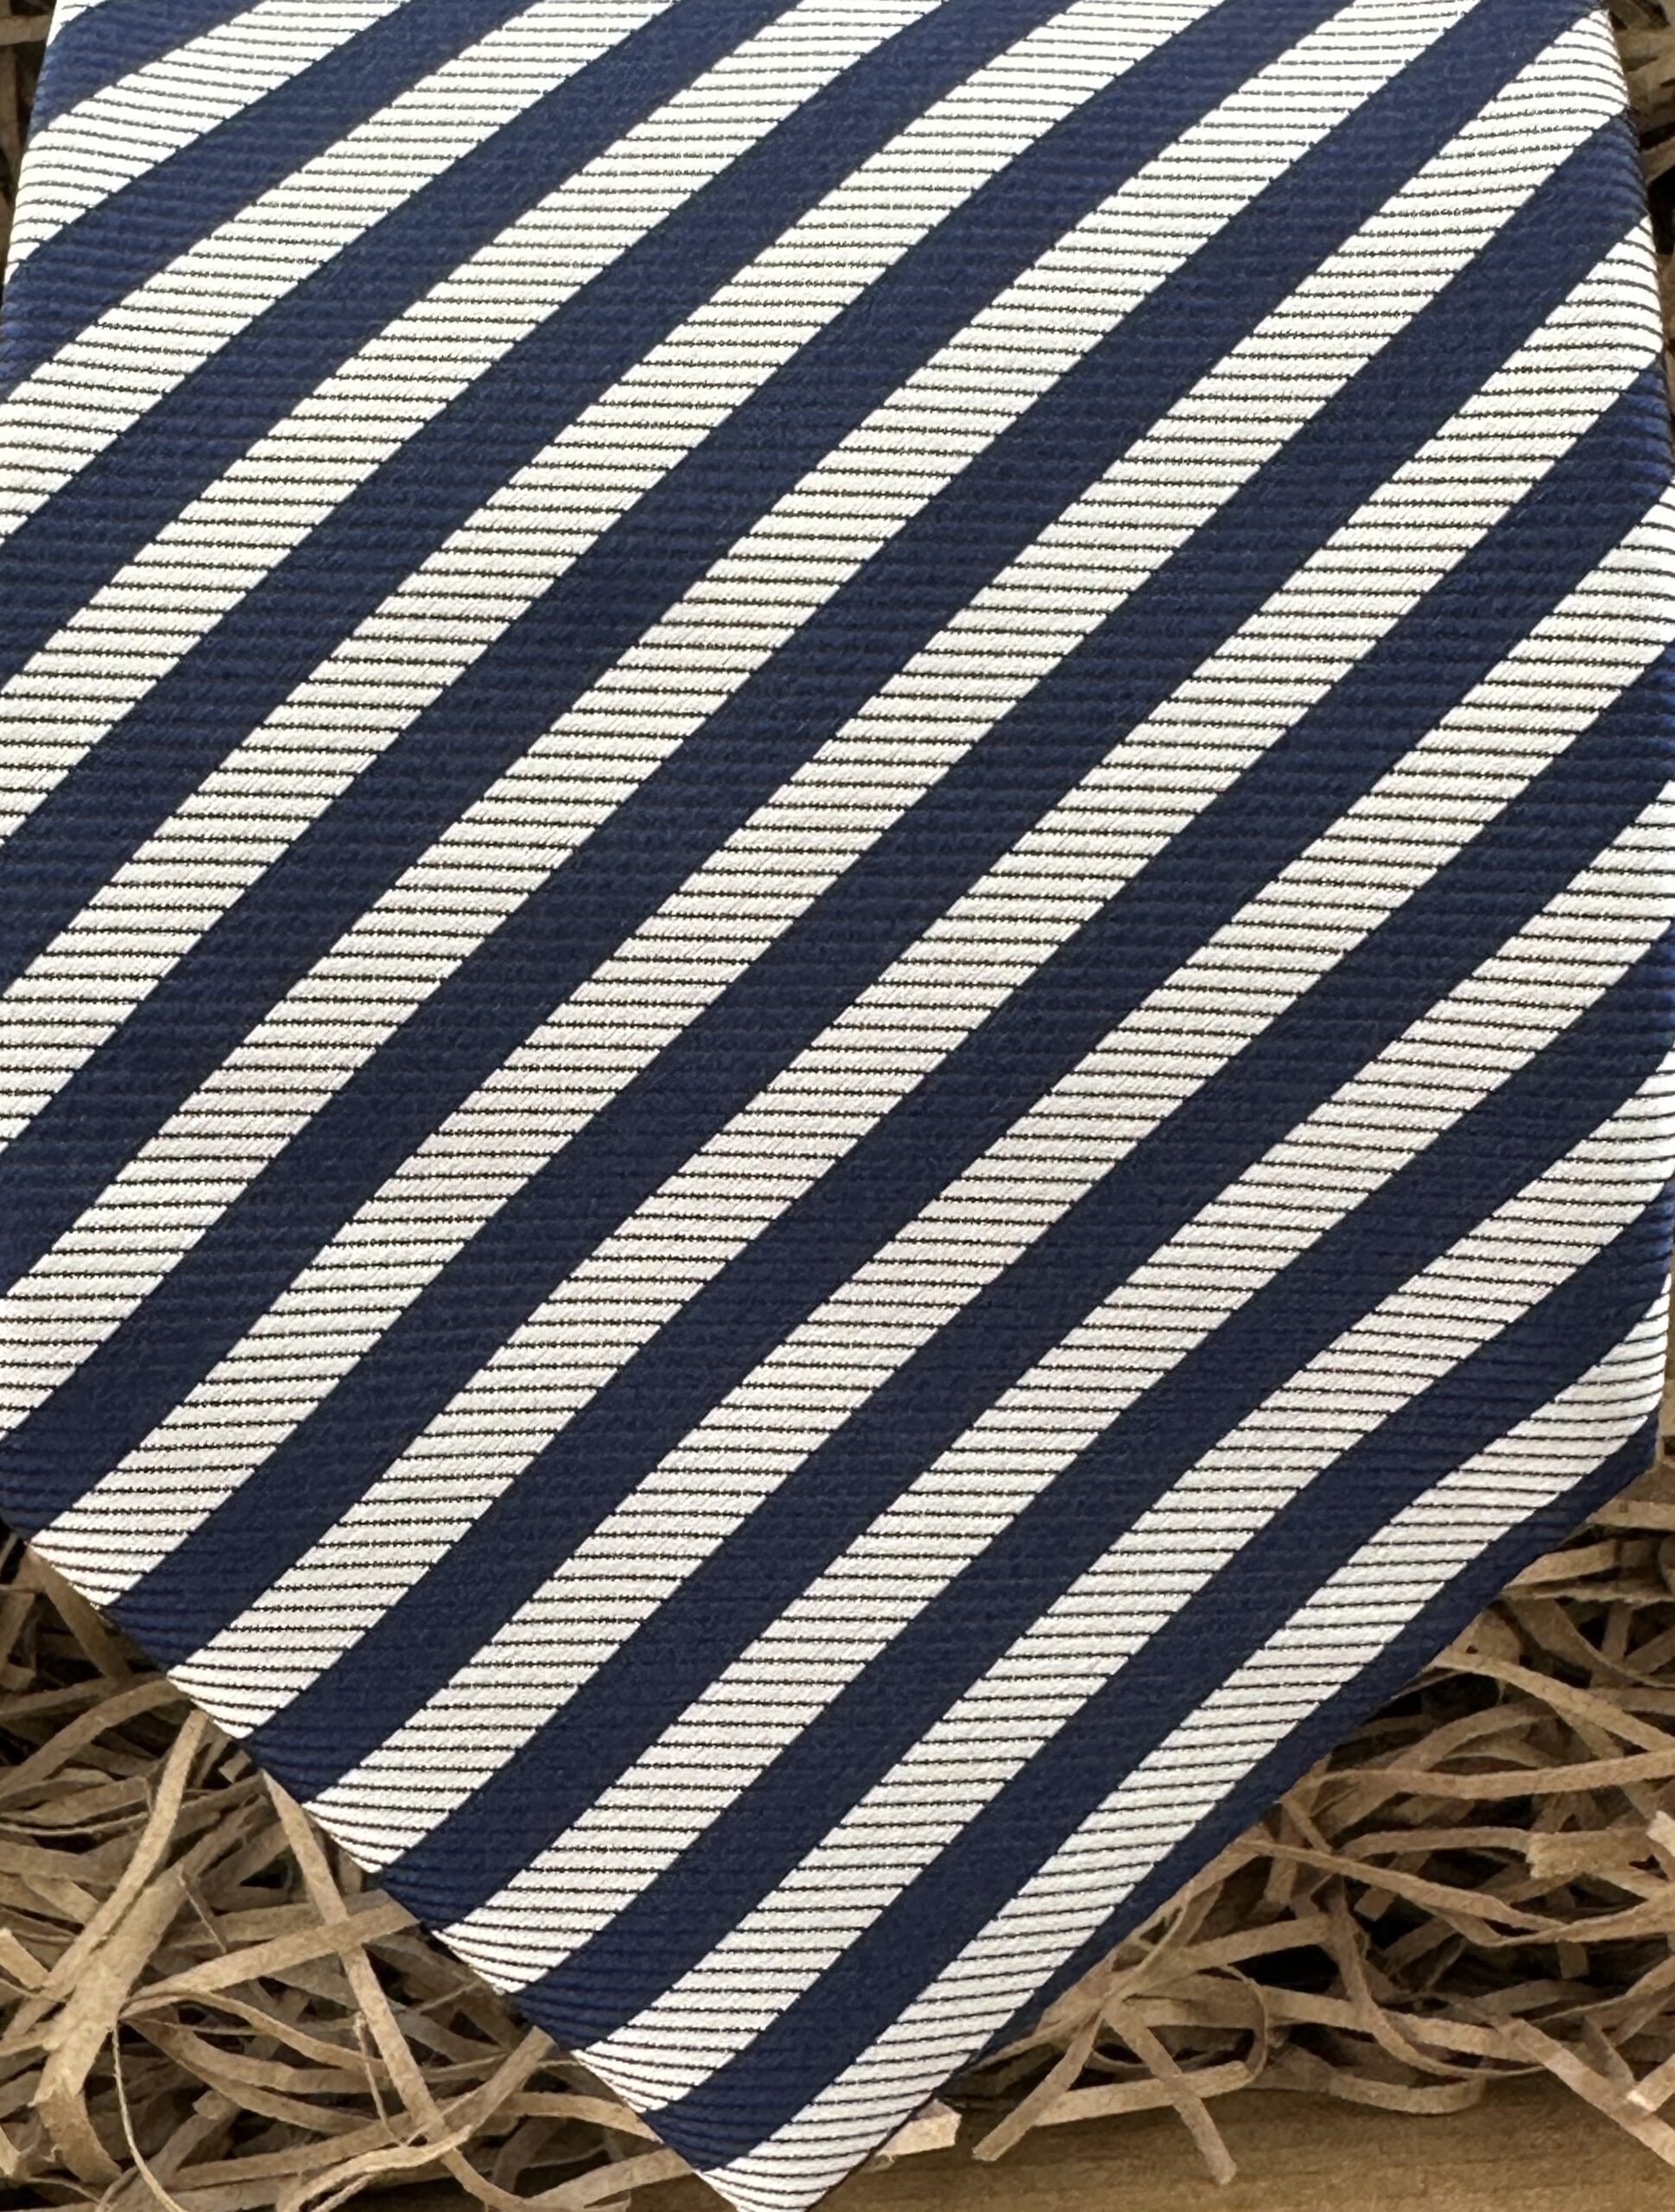 A photo of an 8 cm wide mens' necktie in a sliver and navy stripe.